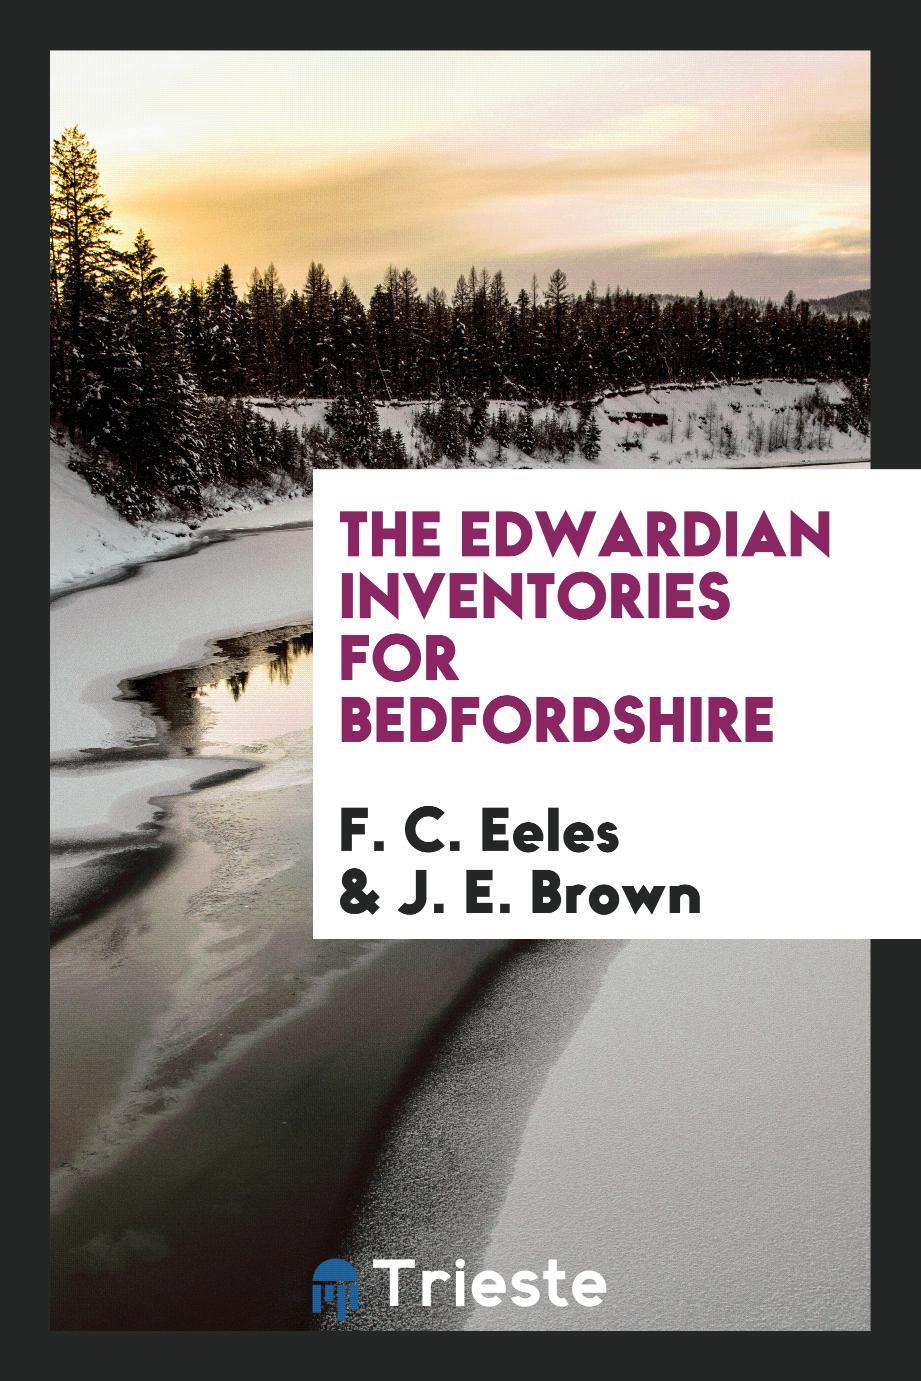 The Edwardian inventories for Bedfordshire